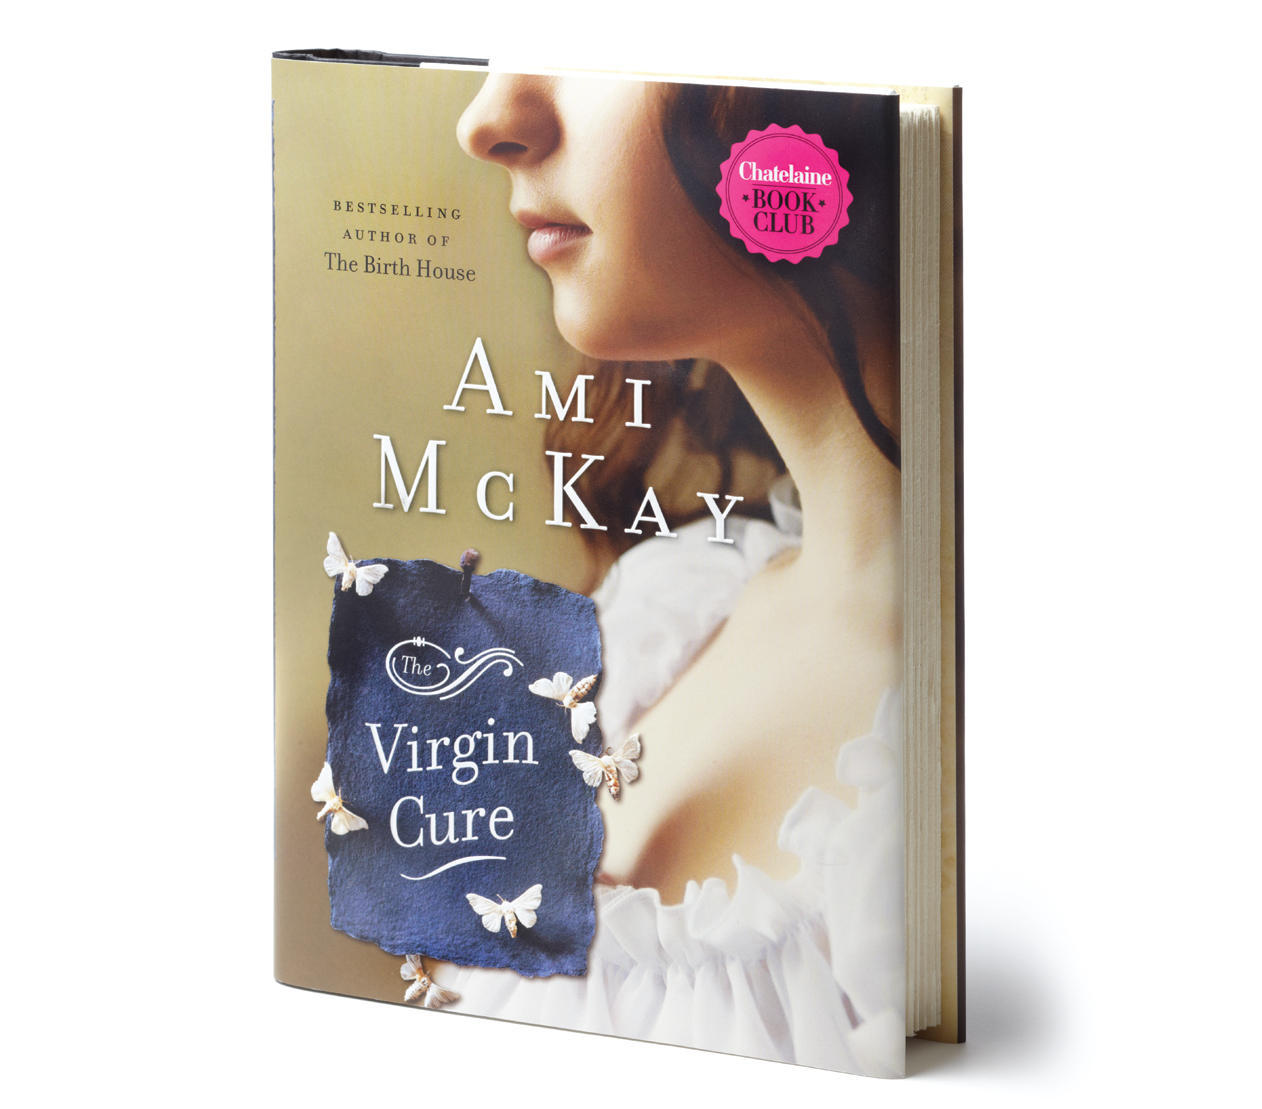 Discussion:  The Virgin Cure by Ami McKay, Part 3